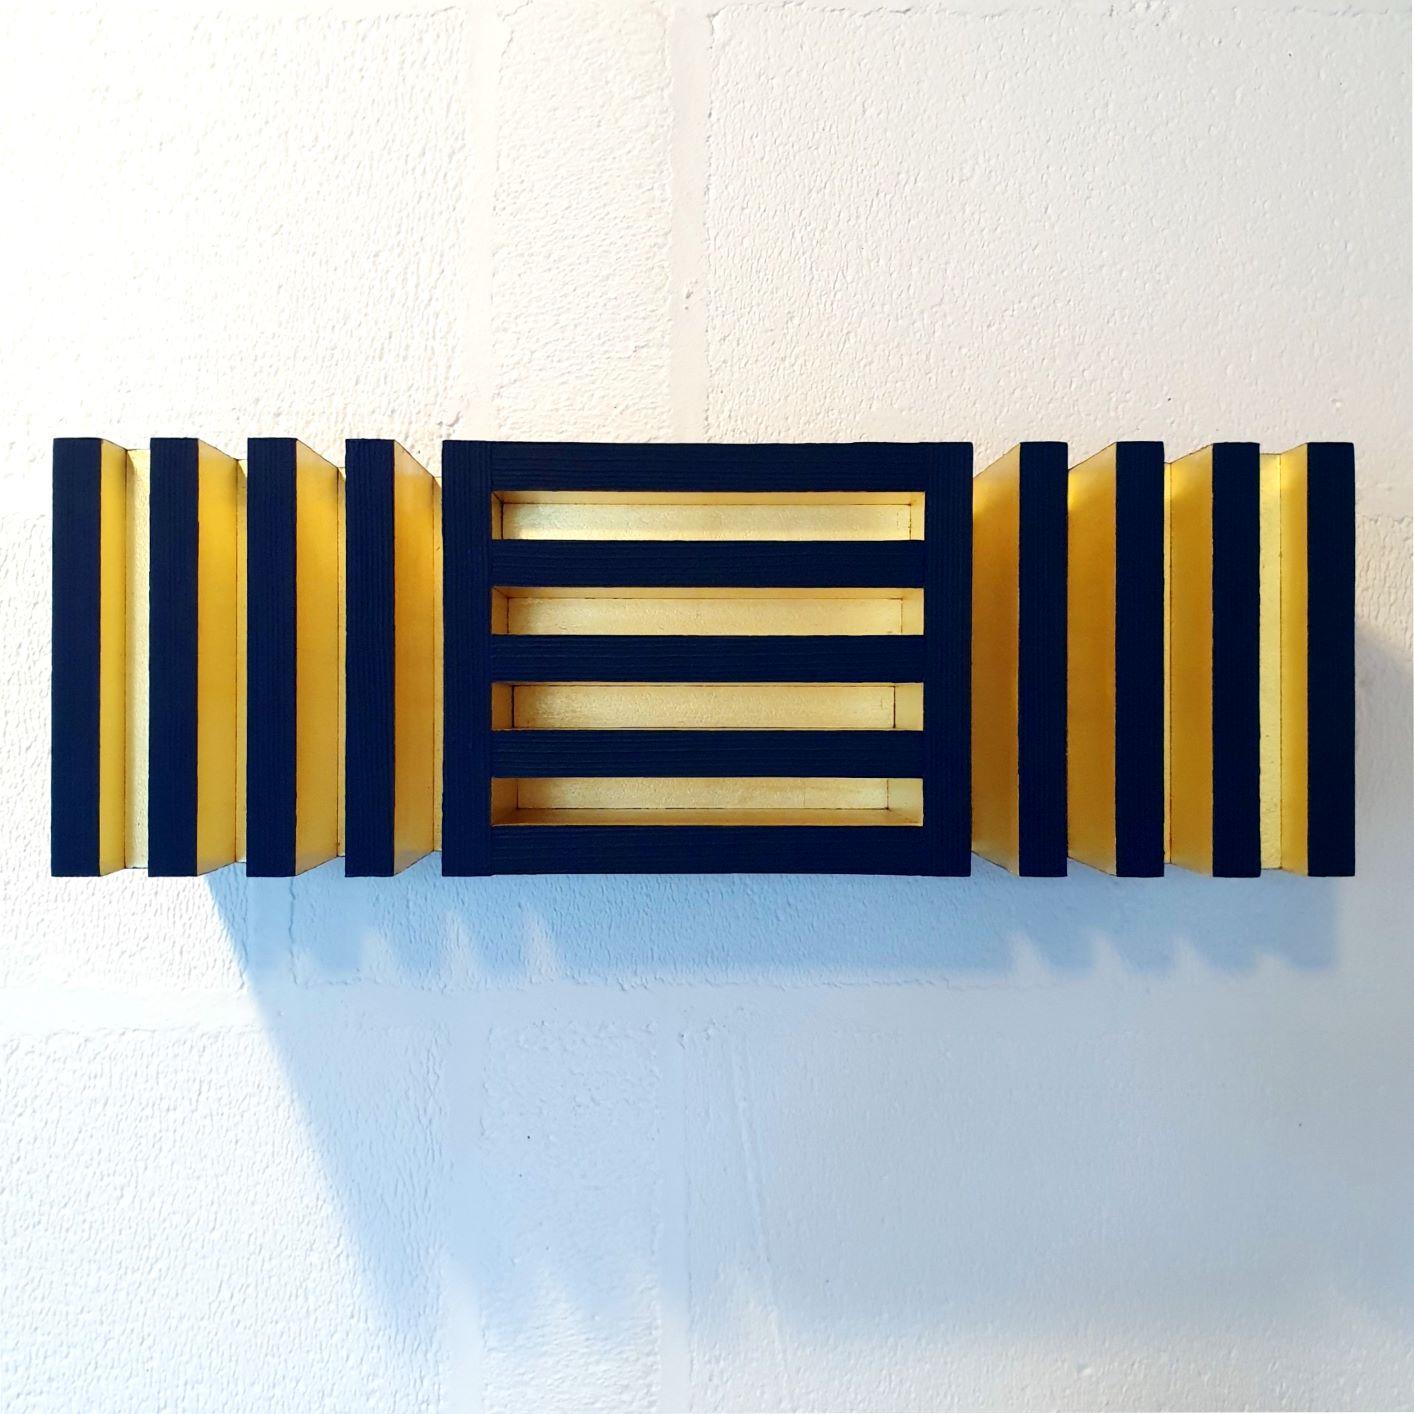 Luminosité changeante II - contemporary modern sculpture painting relief - Abstract Geometric Sculpture by Olivier Julia